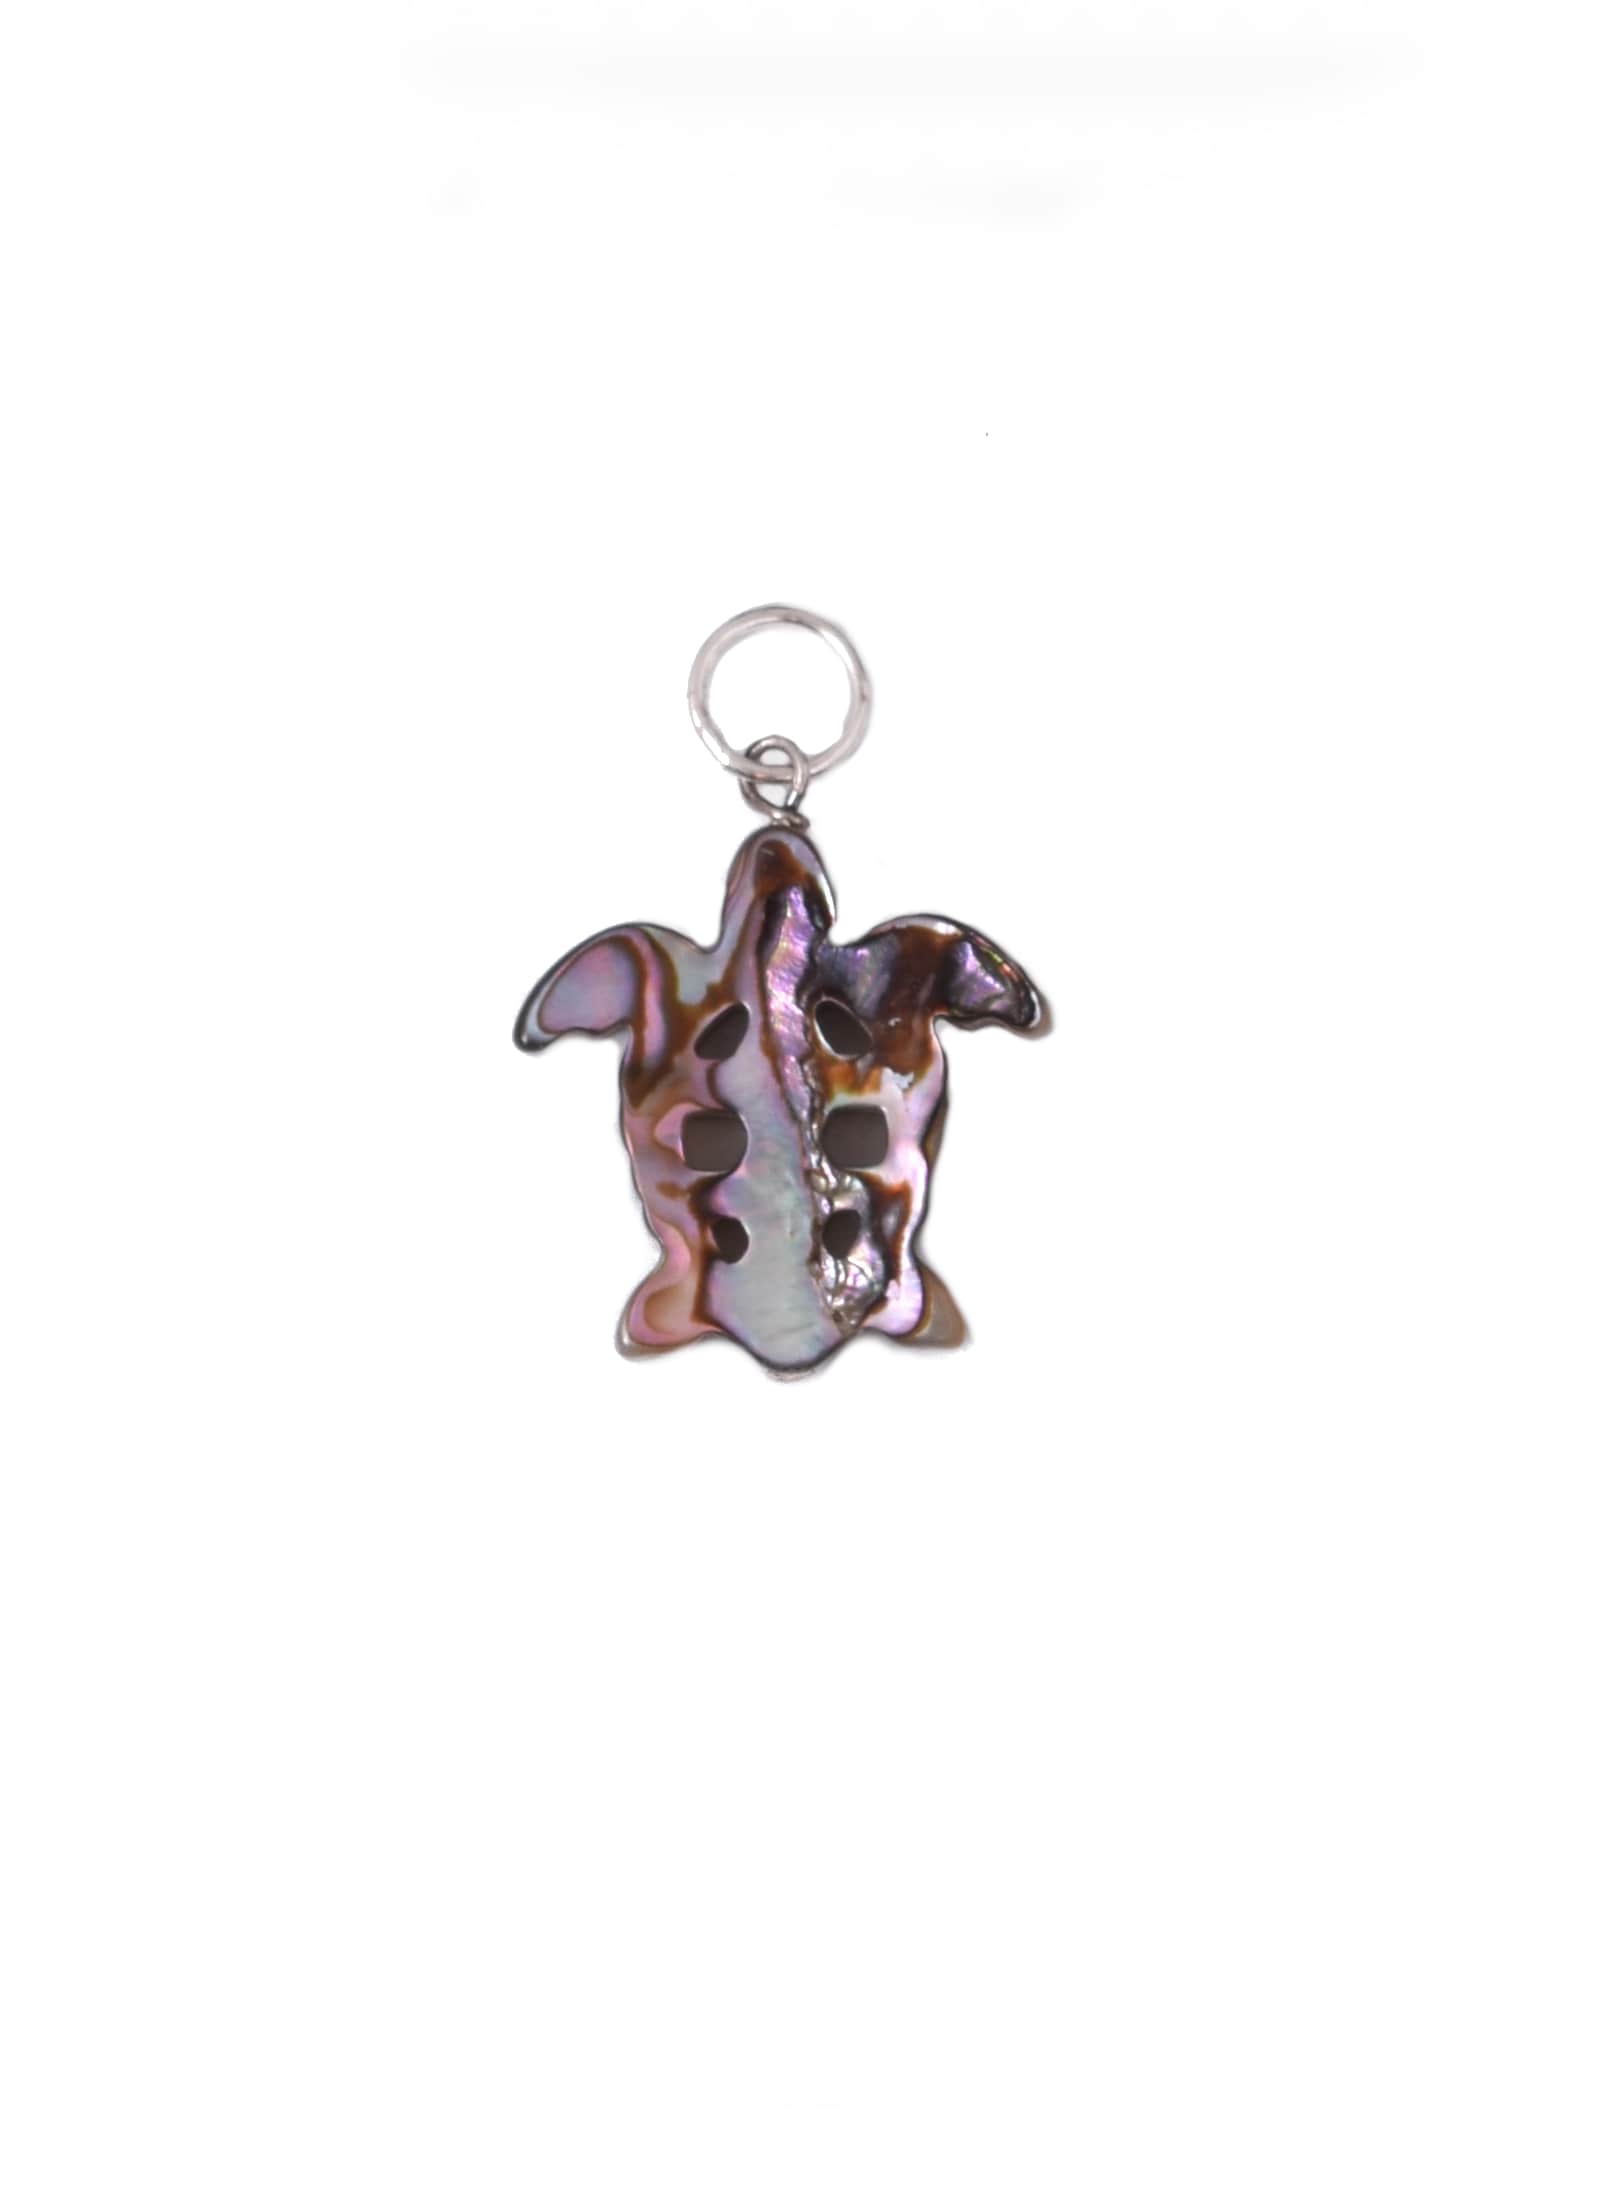 Carved Turtle Charm in Abalone